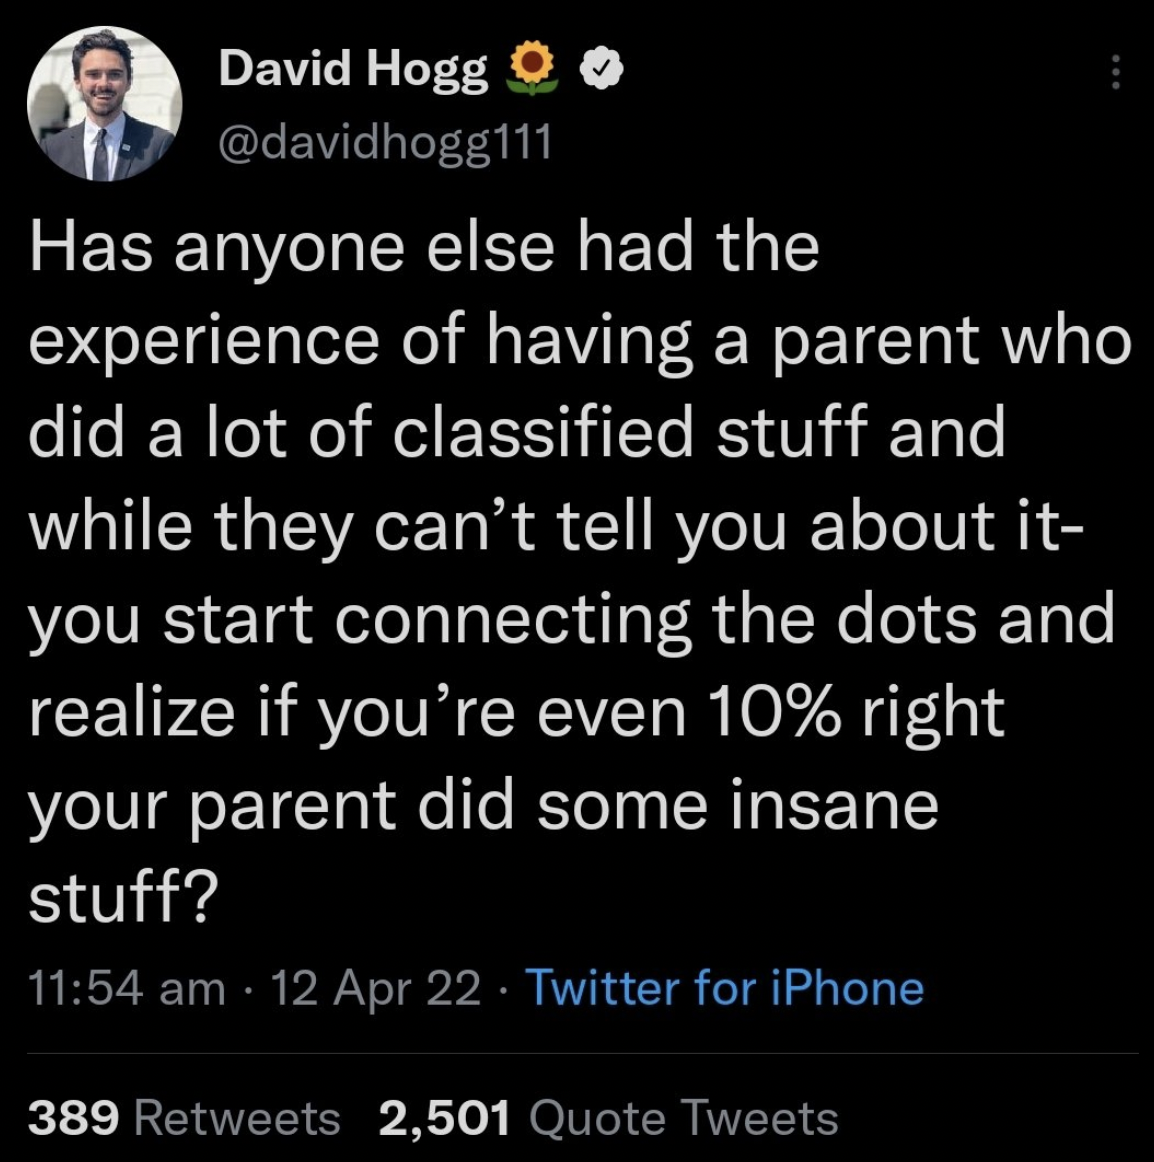 atmosphere - David Hogg O Has anyone else had the experience of having a parent who did a lot of classified stuff and while they can't tell you about it you start connecting the dots and realize if you're even 10% right your parent did some insane stuff?